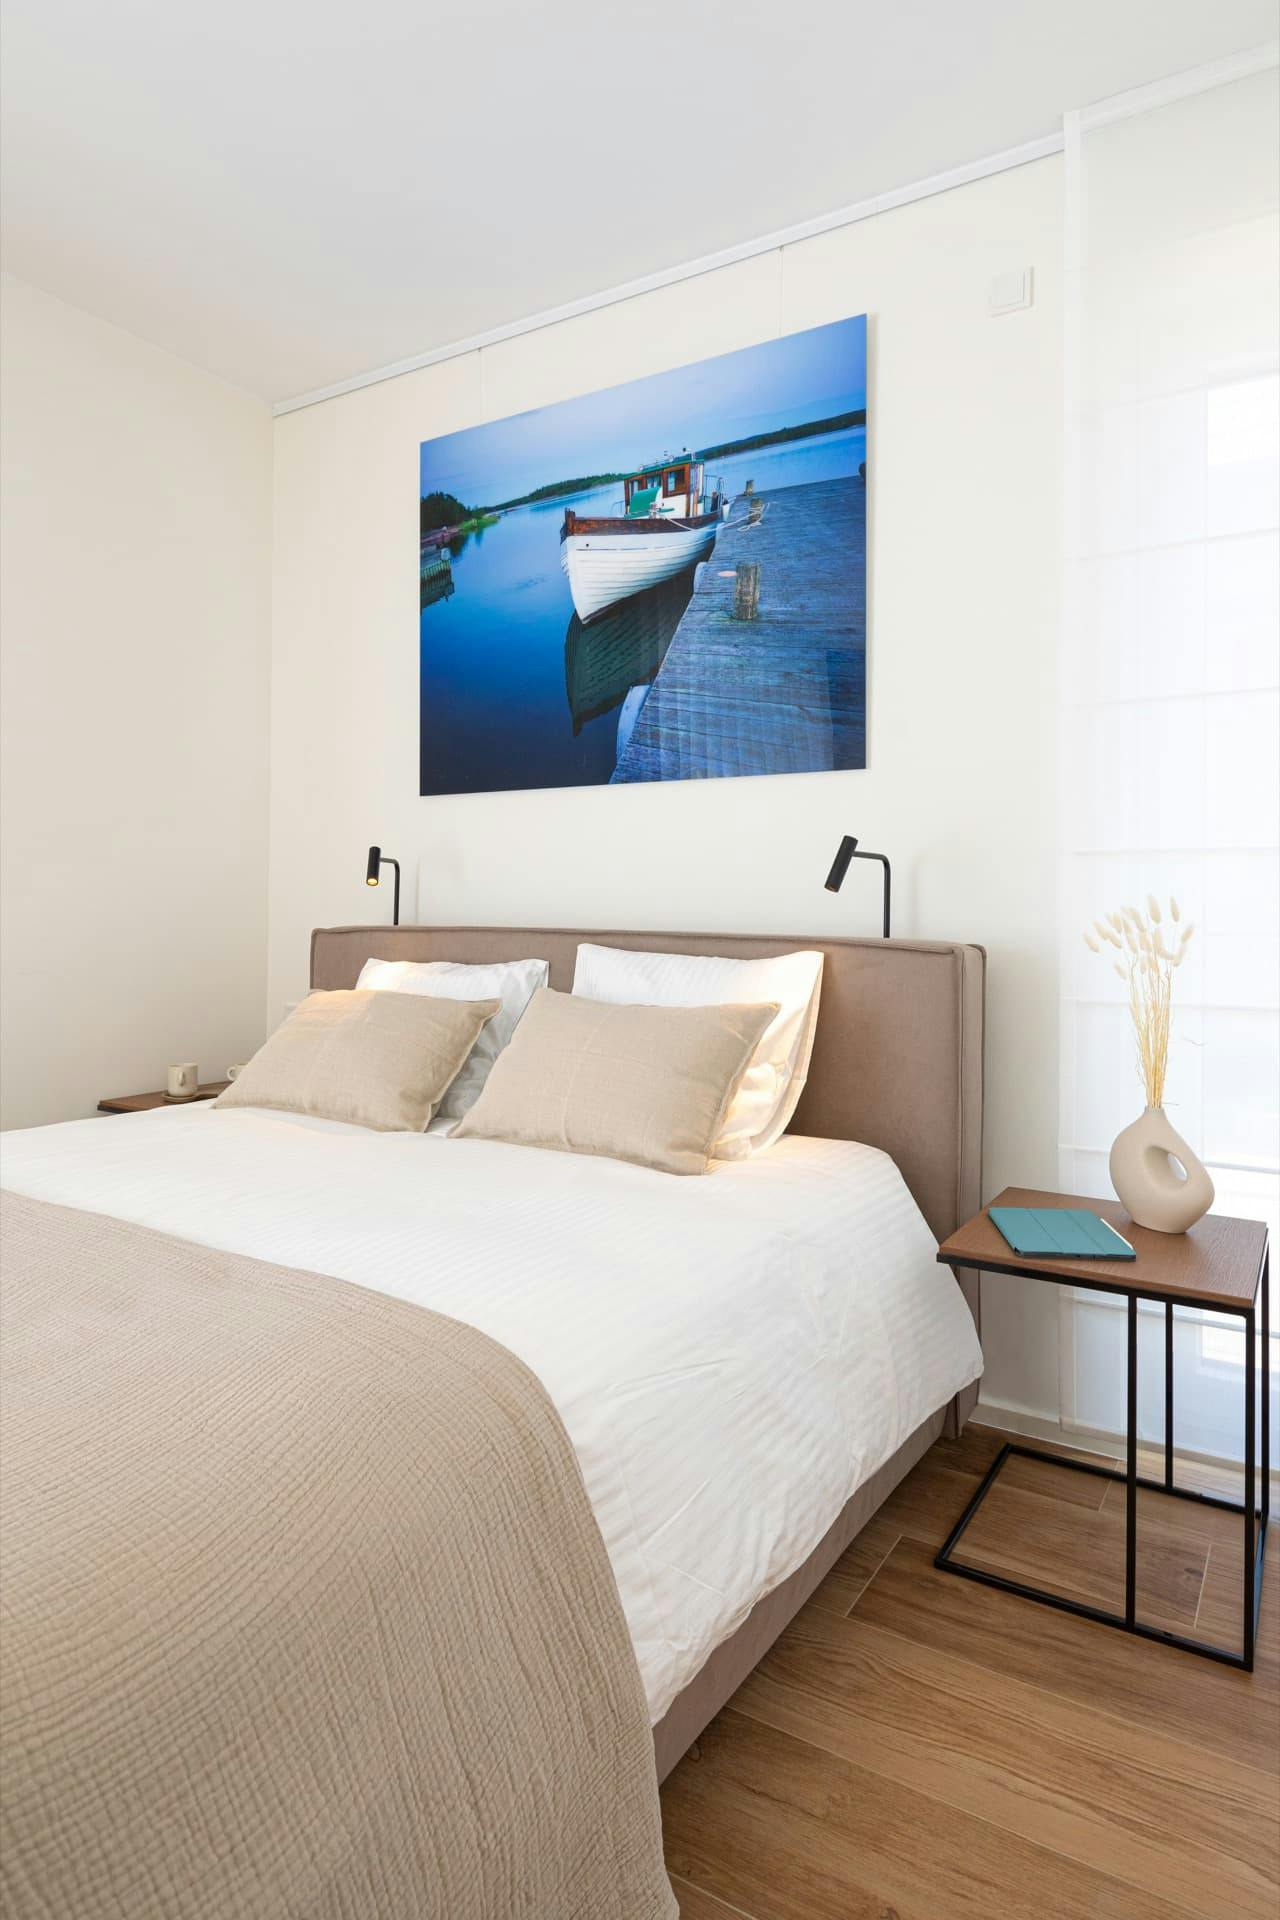 a bed with white bedding and stone coloured pillows with bedside table and a large floor to ceiling window on the right. There are coffee cups, an ipad and a vase of dried grasses on the tables and a large photograph of a boat at sea above the bed.